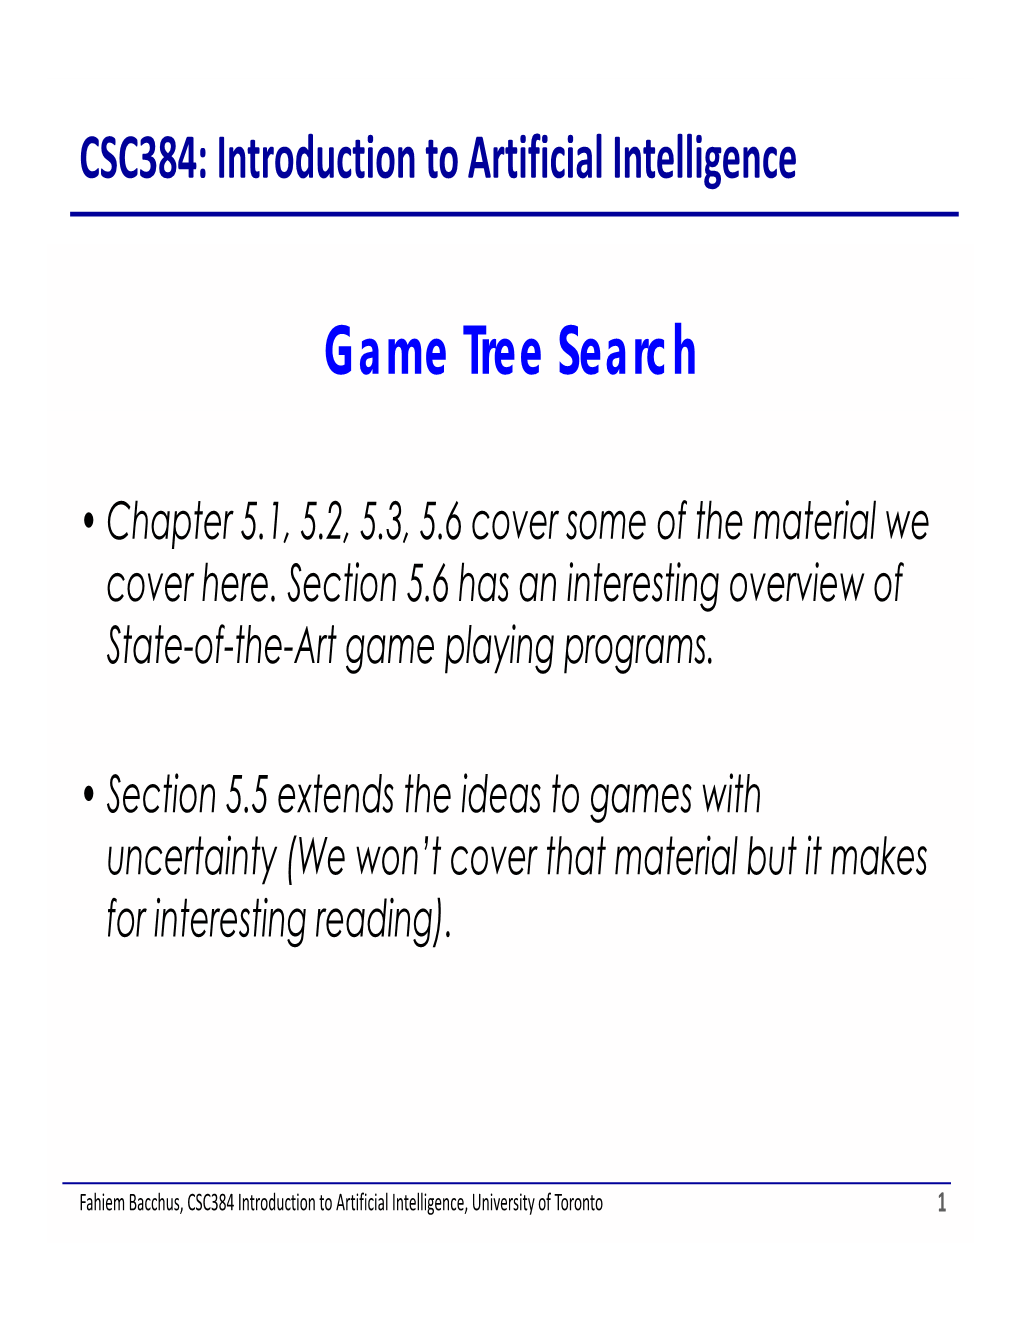 Game Tree Search